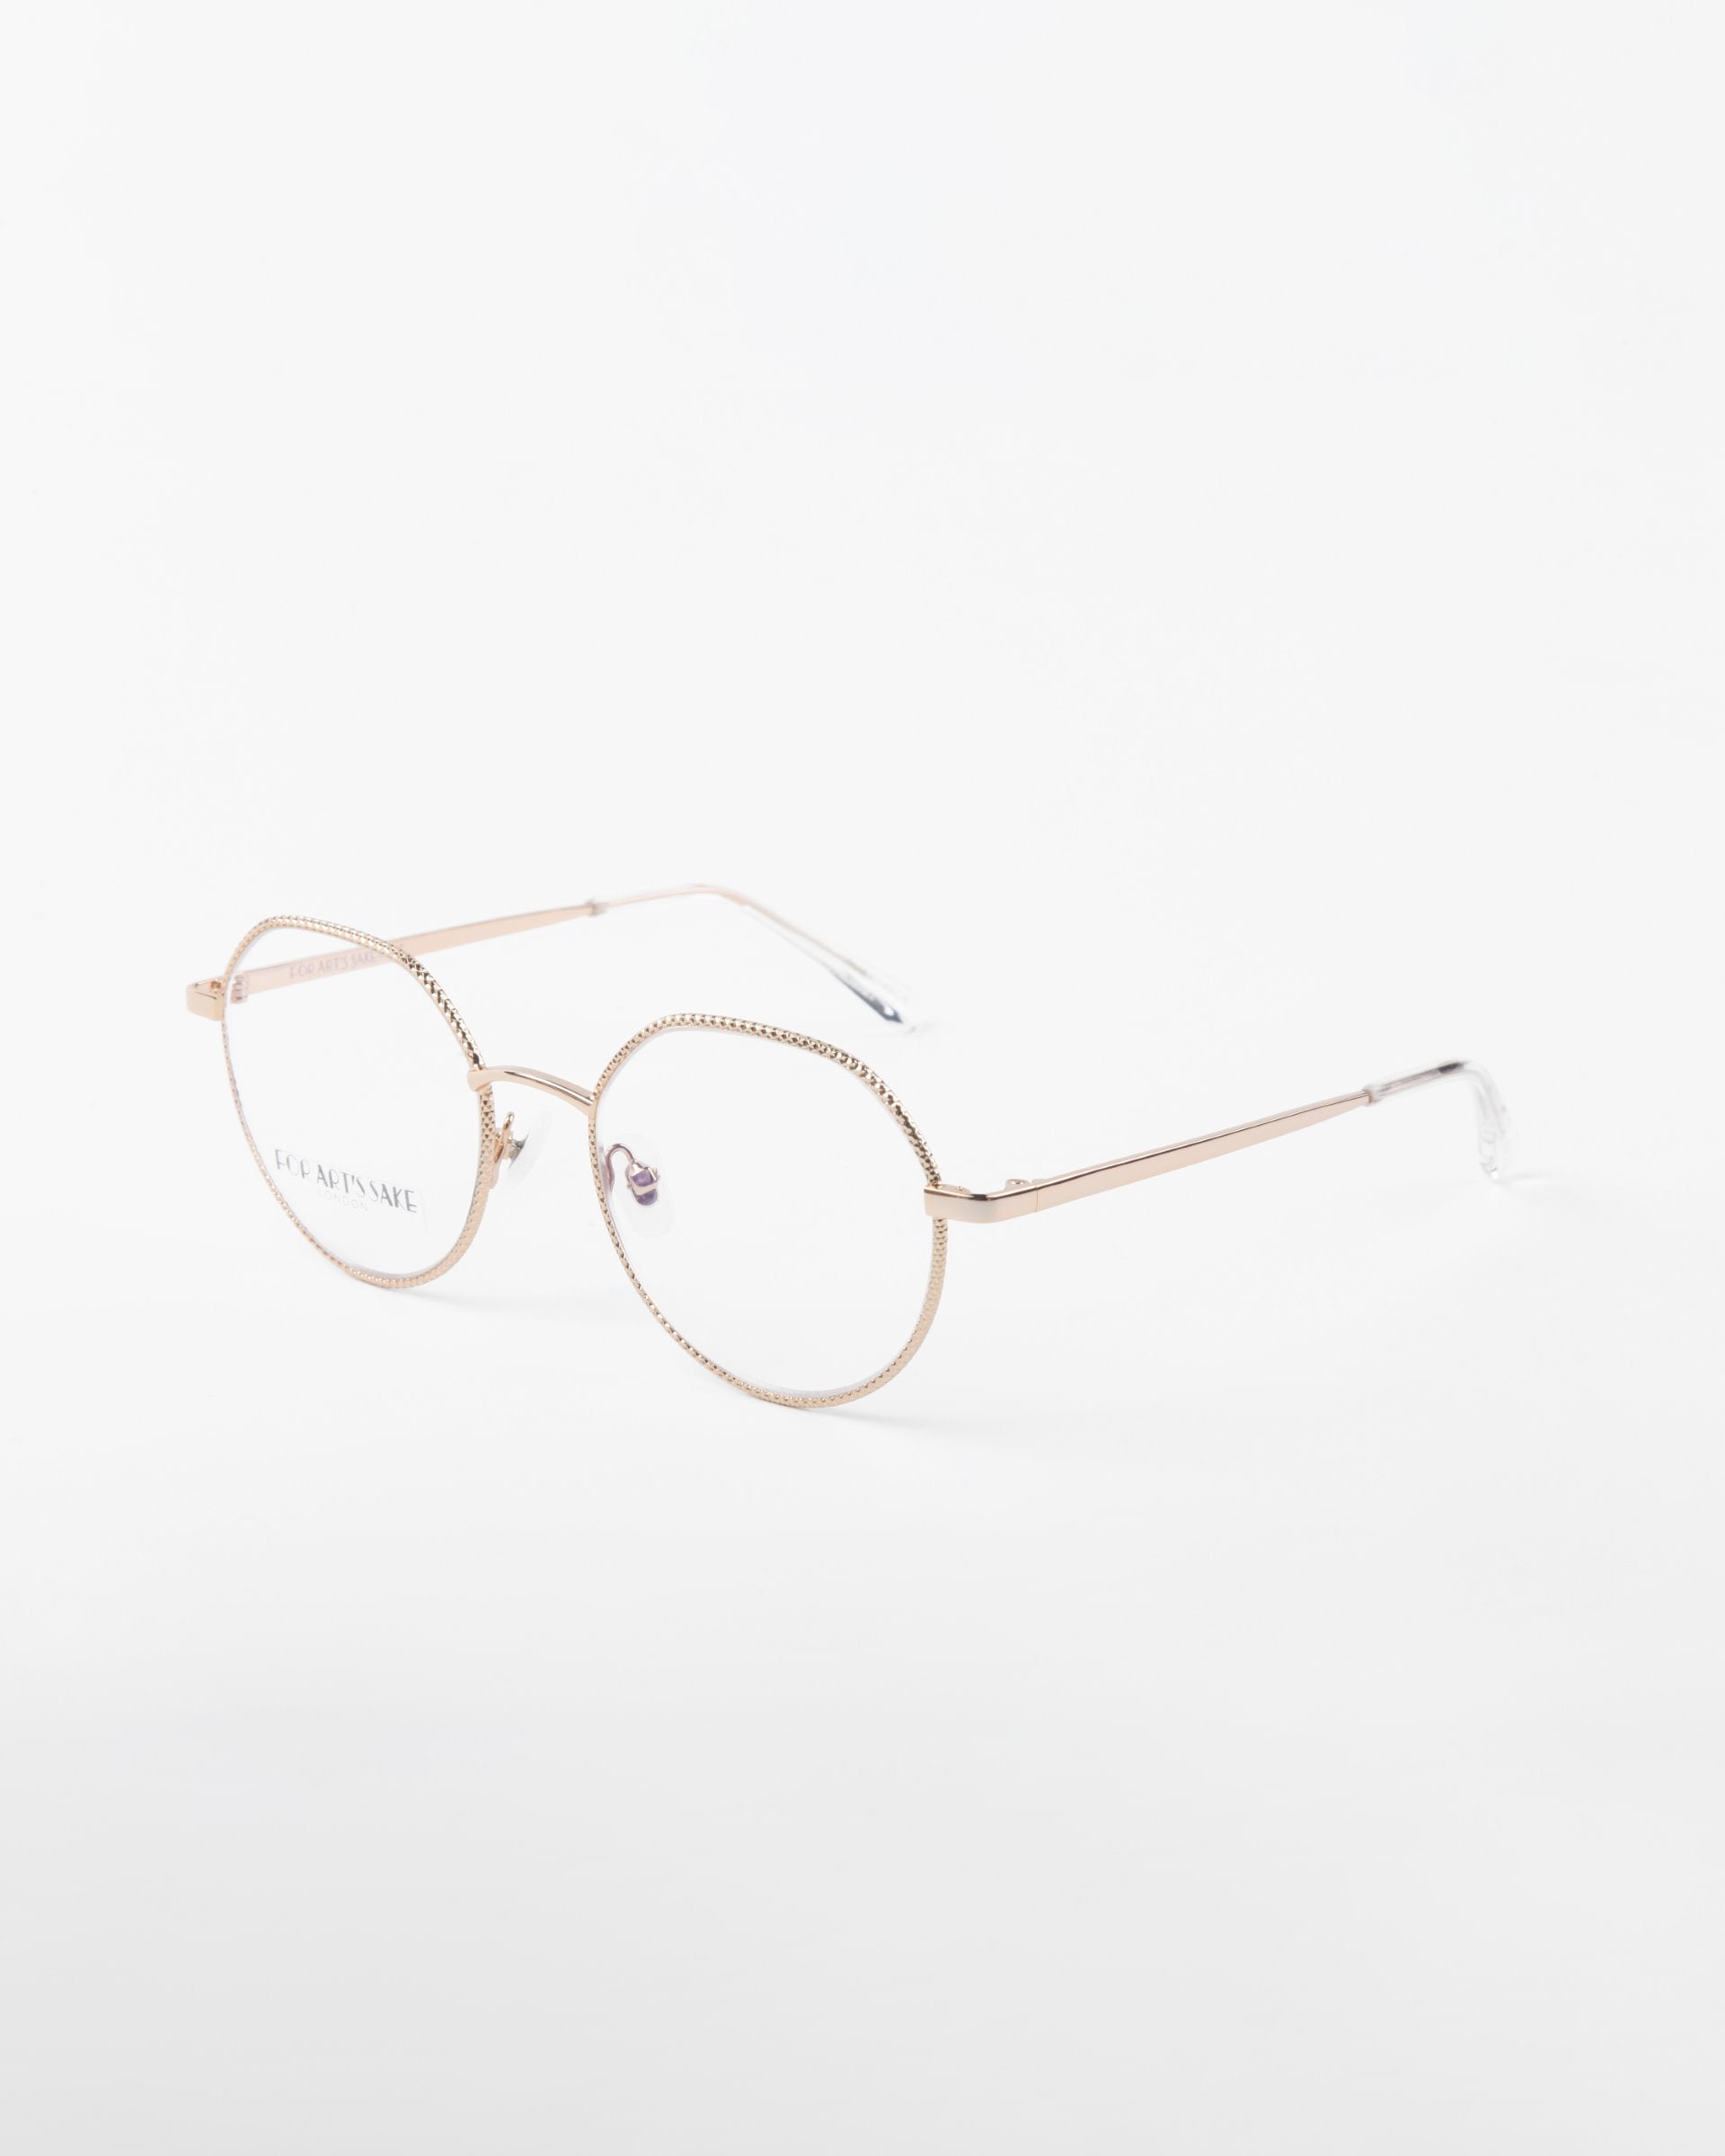 A pair of 18-karat gold-plated, round eyeglasses with clear lenses positioned at an angle against a white background. The frames have a thin, delicate design with a slight pattern on the rims. The temples are slender and straight with clear plastic tips. Perfect for adding blue light filter or prescription service! These are the Hope eyeglasses by For Art&#39;s Sake®.